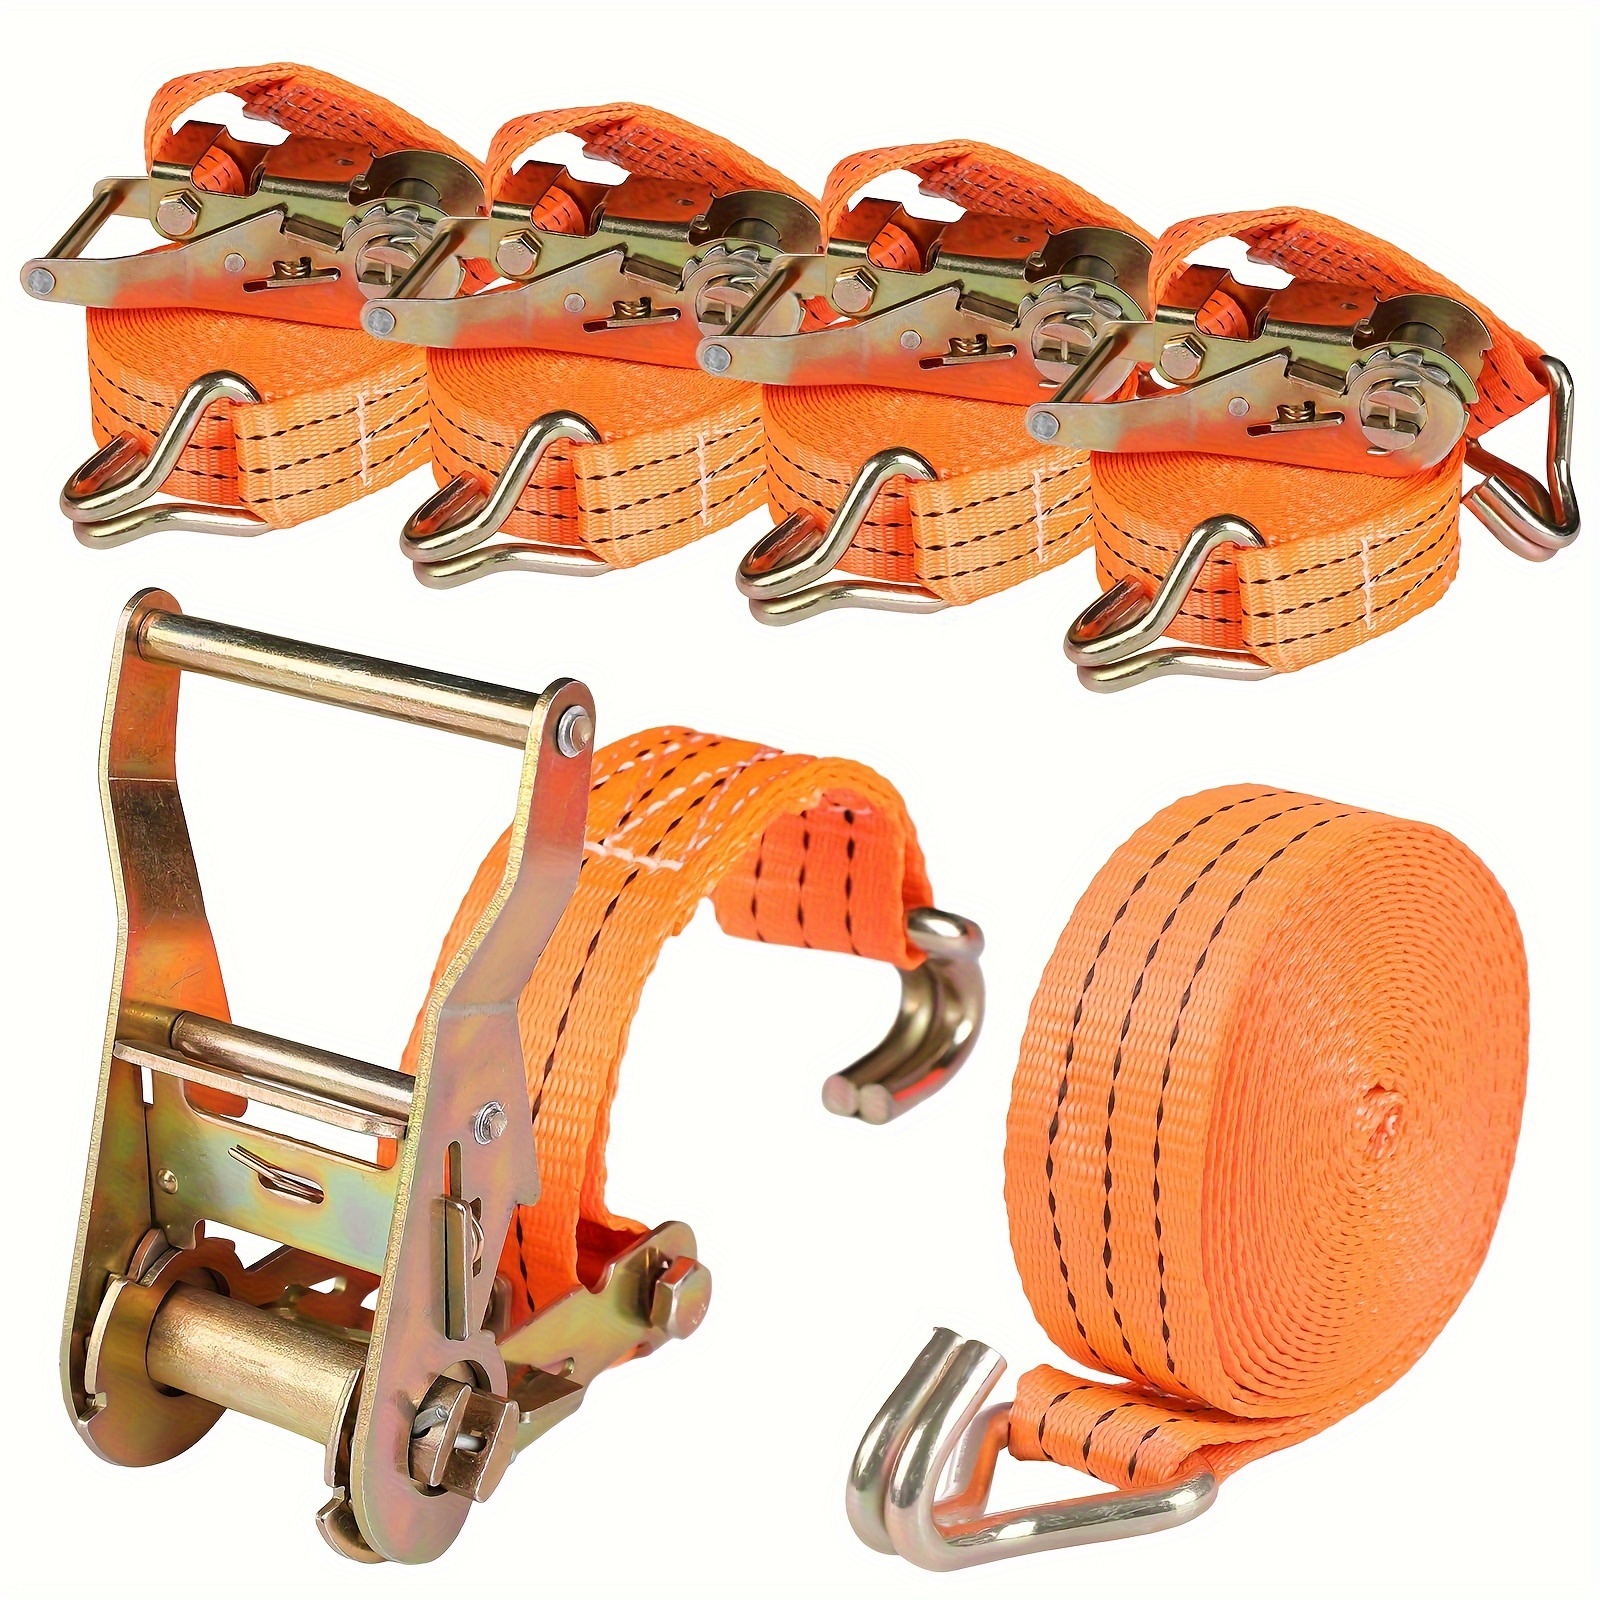 

Heavy-duty 6m Lashing Straps With Ratchet And Hook - 3000kg Capacity, Durable Plastic Packing & Shipping Supplies